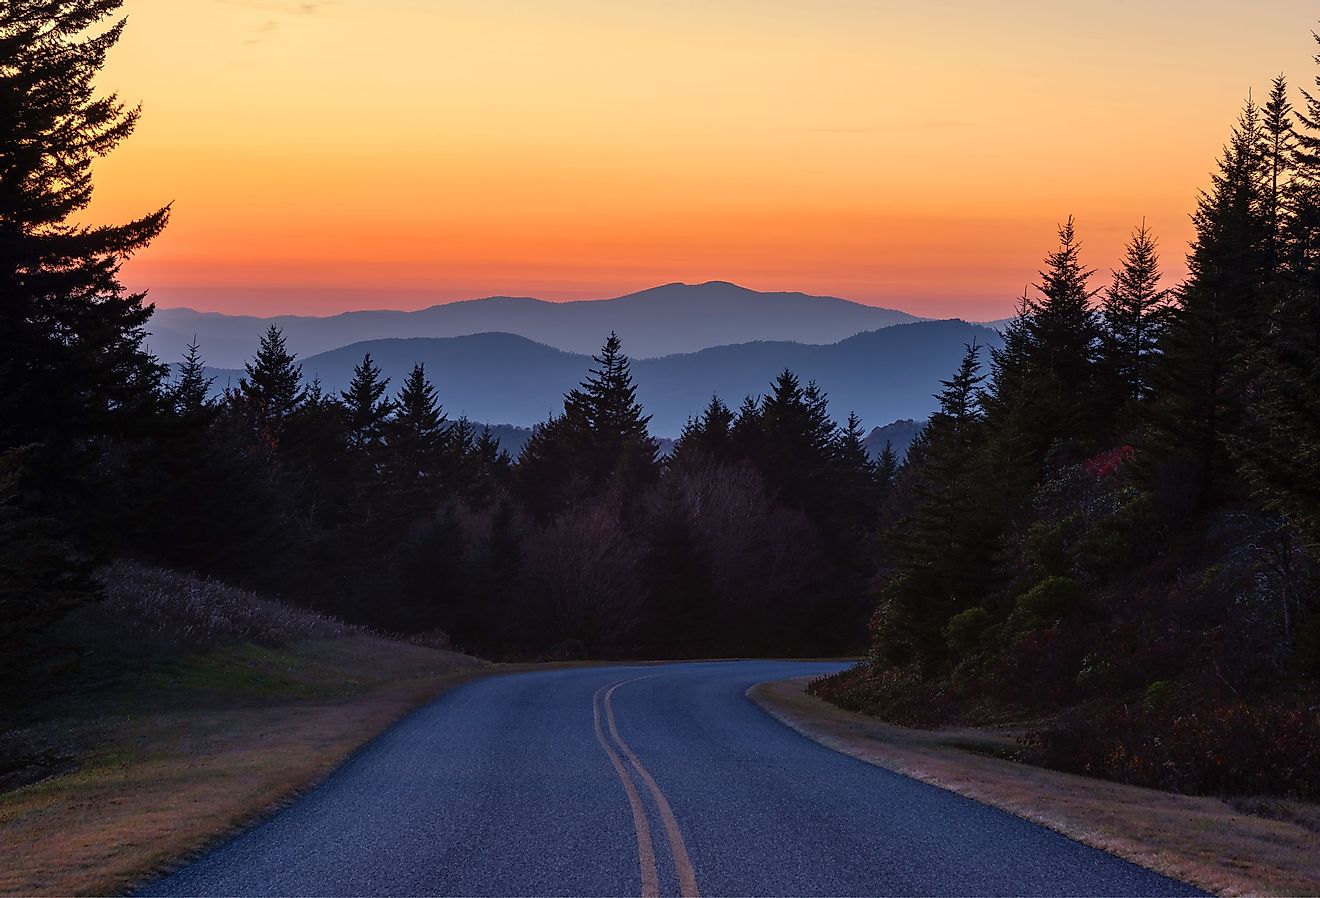 Dusk falls over the Blue Ridge Mountains along the Blue River Parkway. Image credit anthony heflin via Shutterstock.